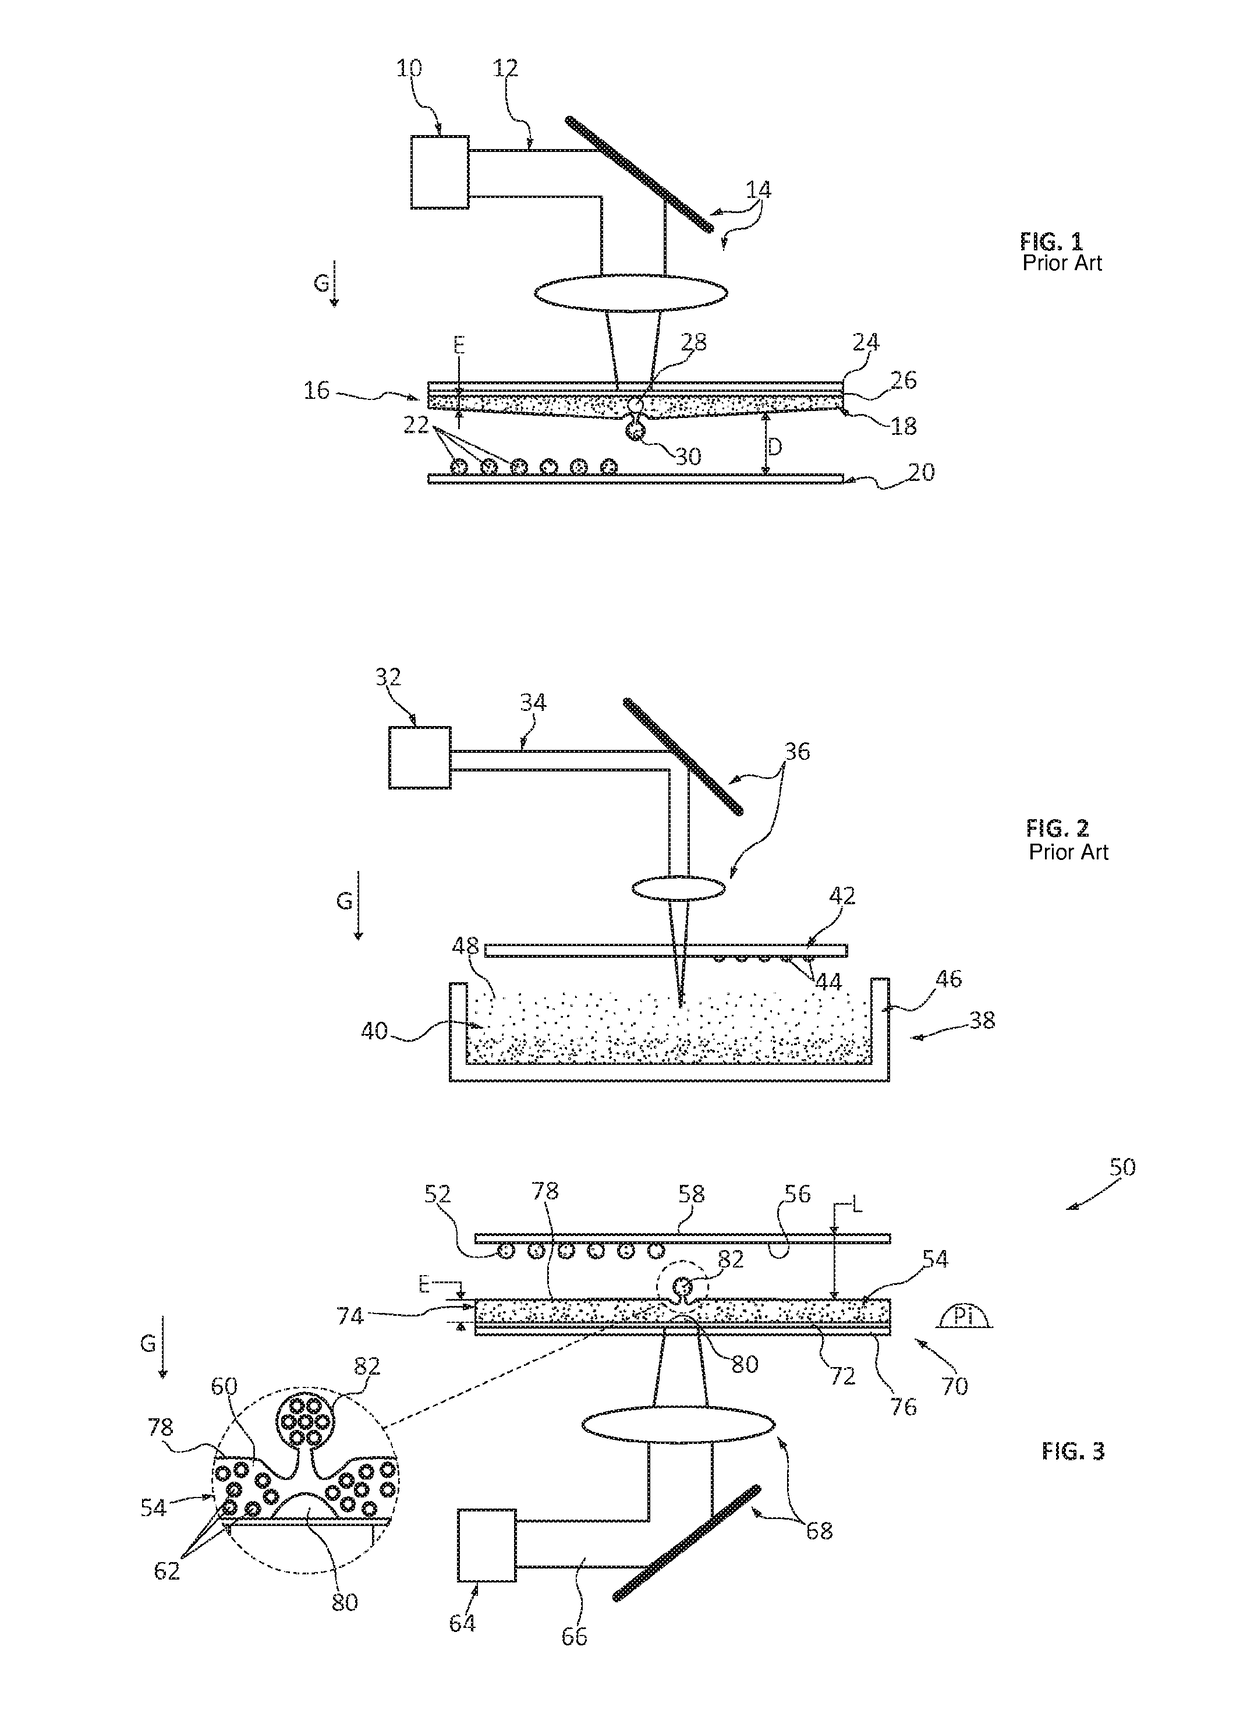 Method for laser printing biological components, and device for implementing said method